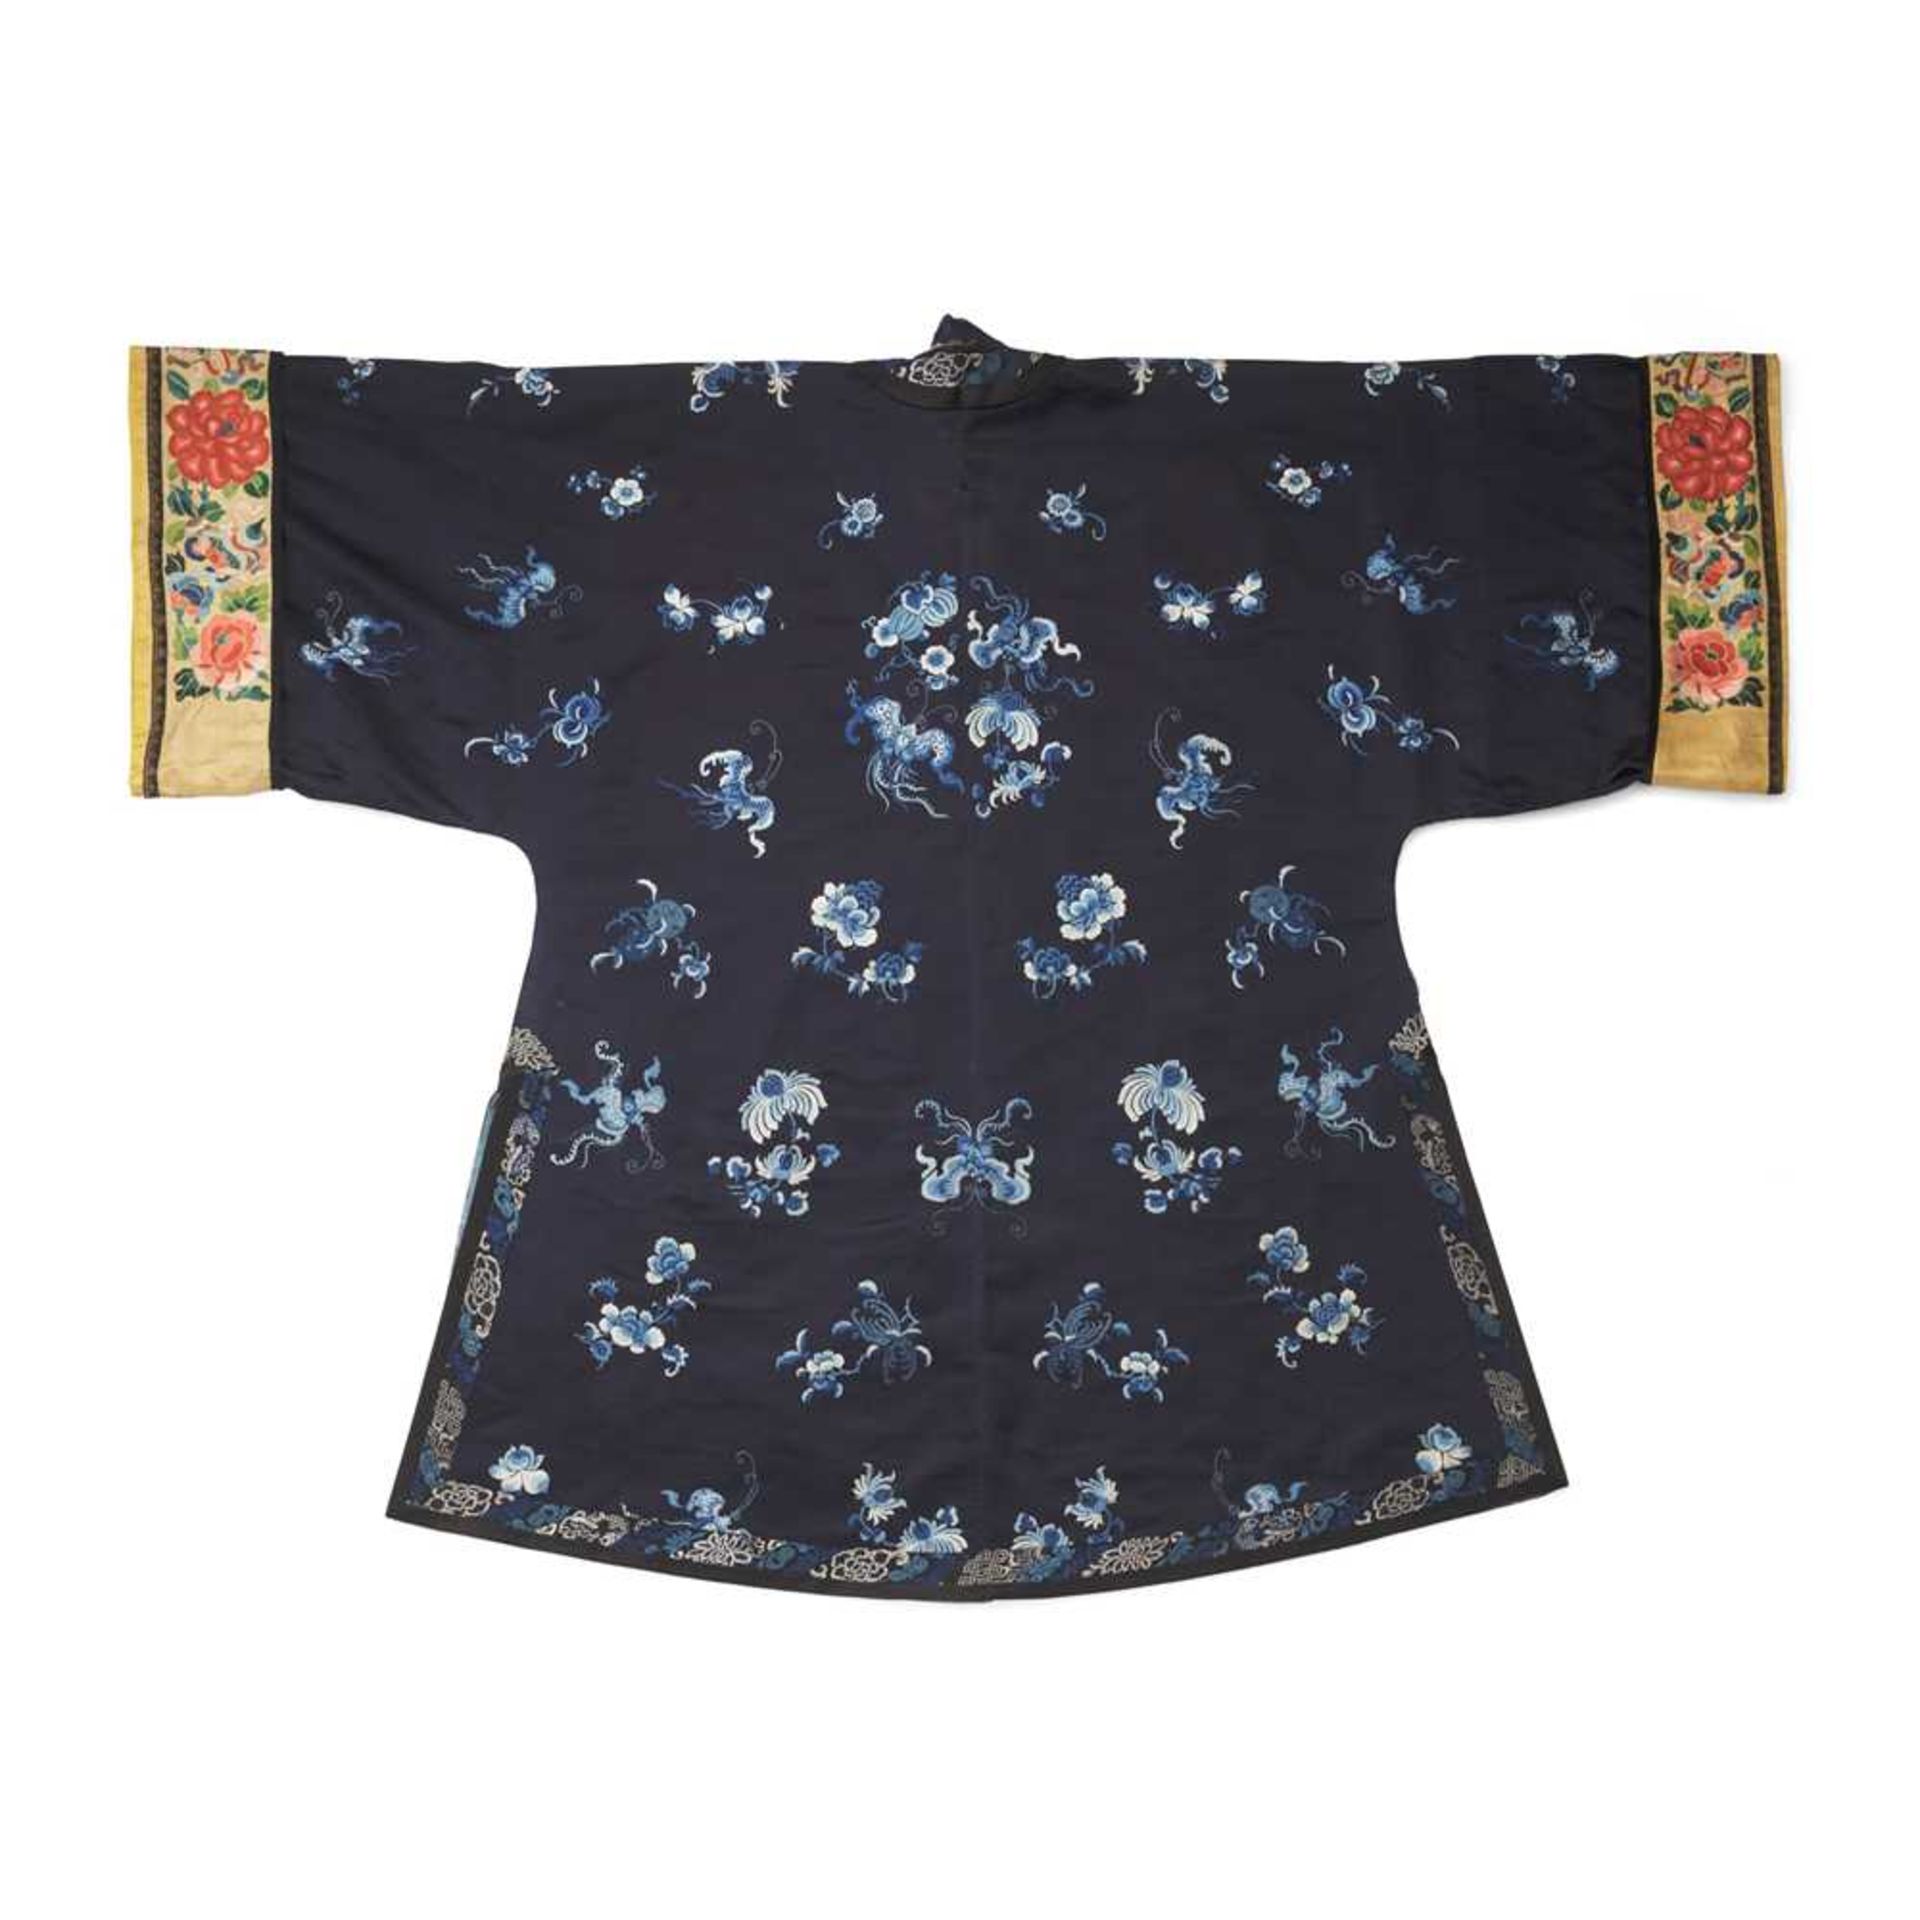 MIDNIGHT-BLUE-GROUND SILK EMBROIDERED LADY'S OVERCOAT LATE QING DYNASTY-REPUBLIC PERIOD, 19TH-20TH C - Bild 2 aus 2